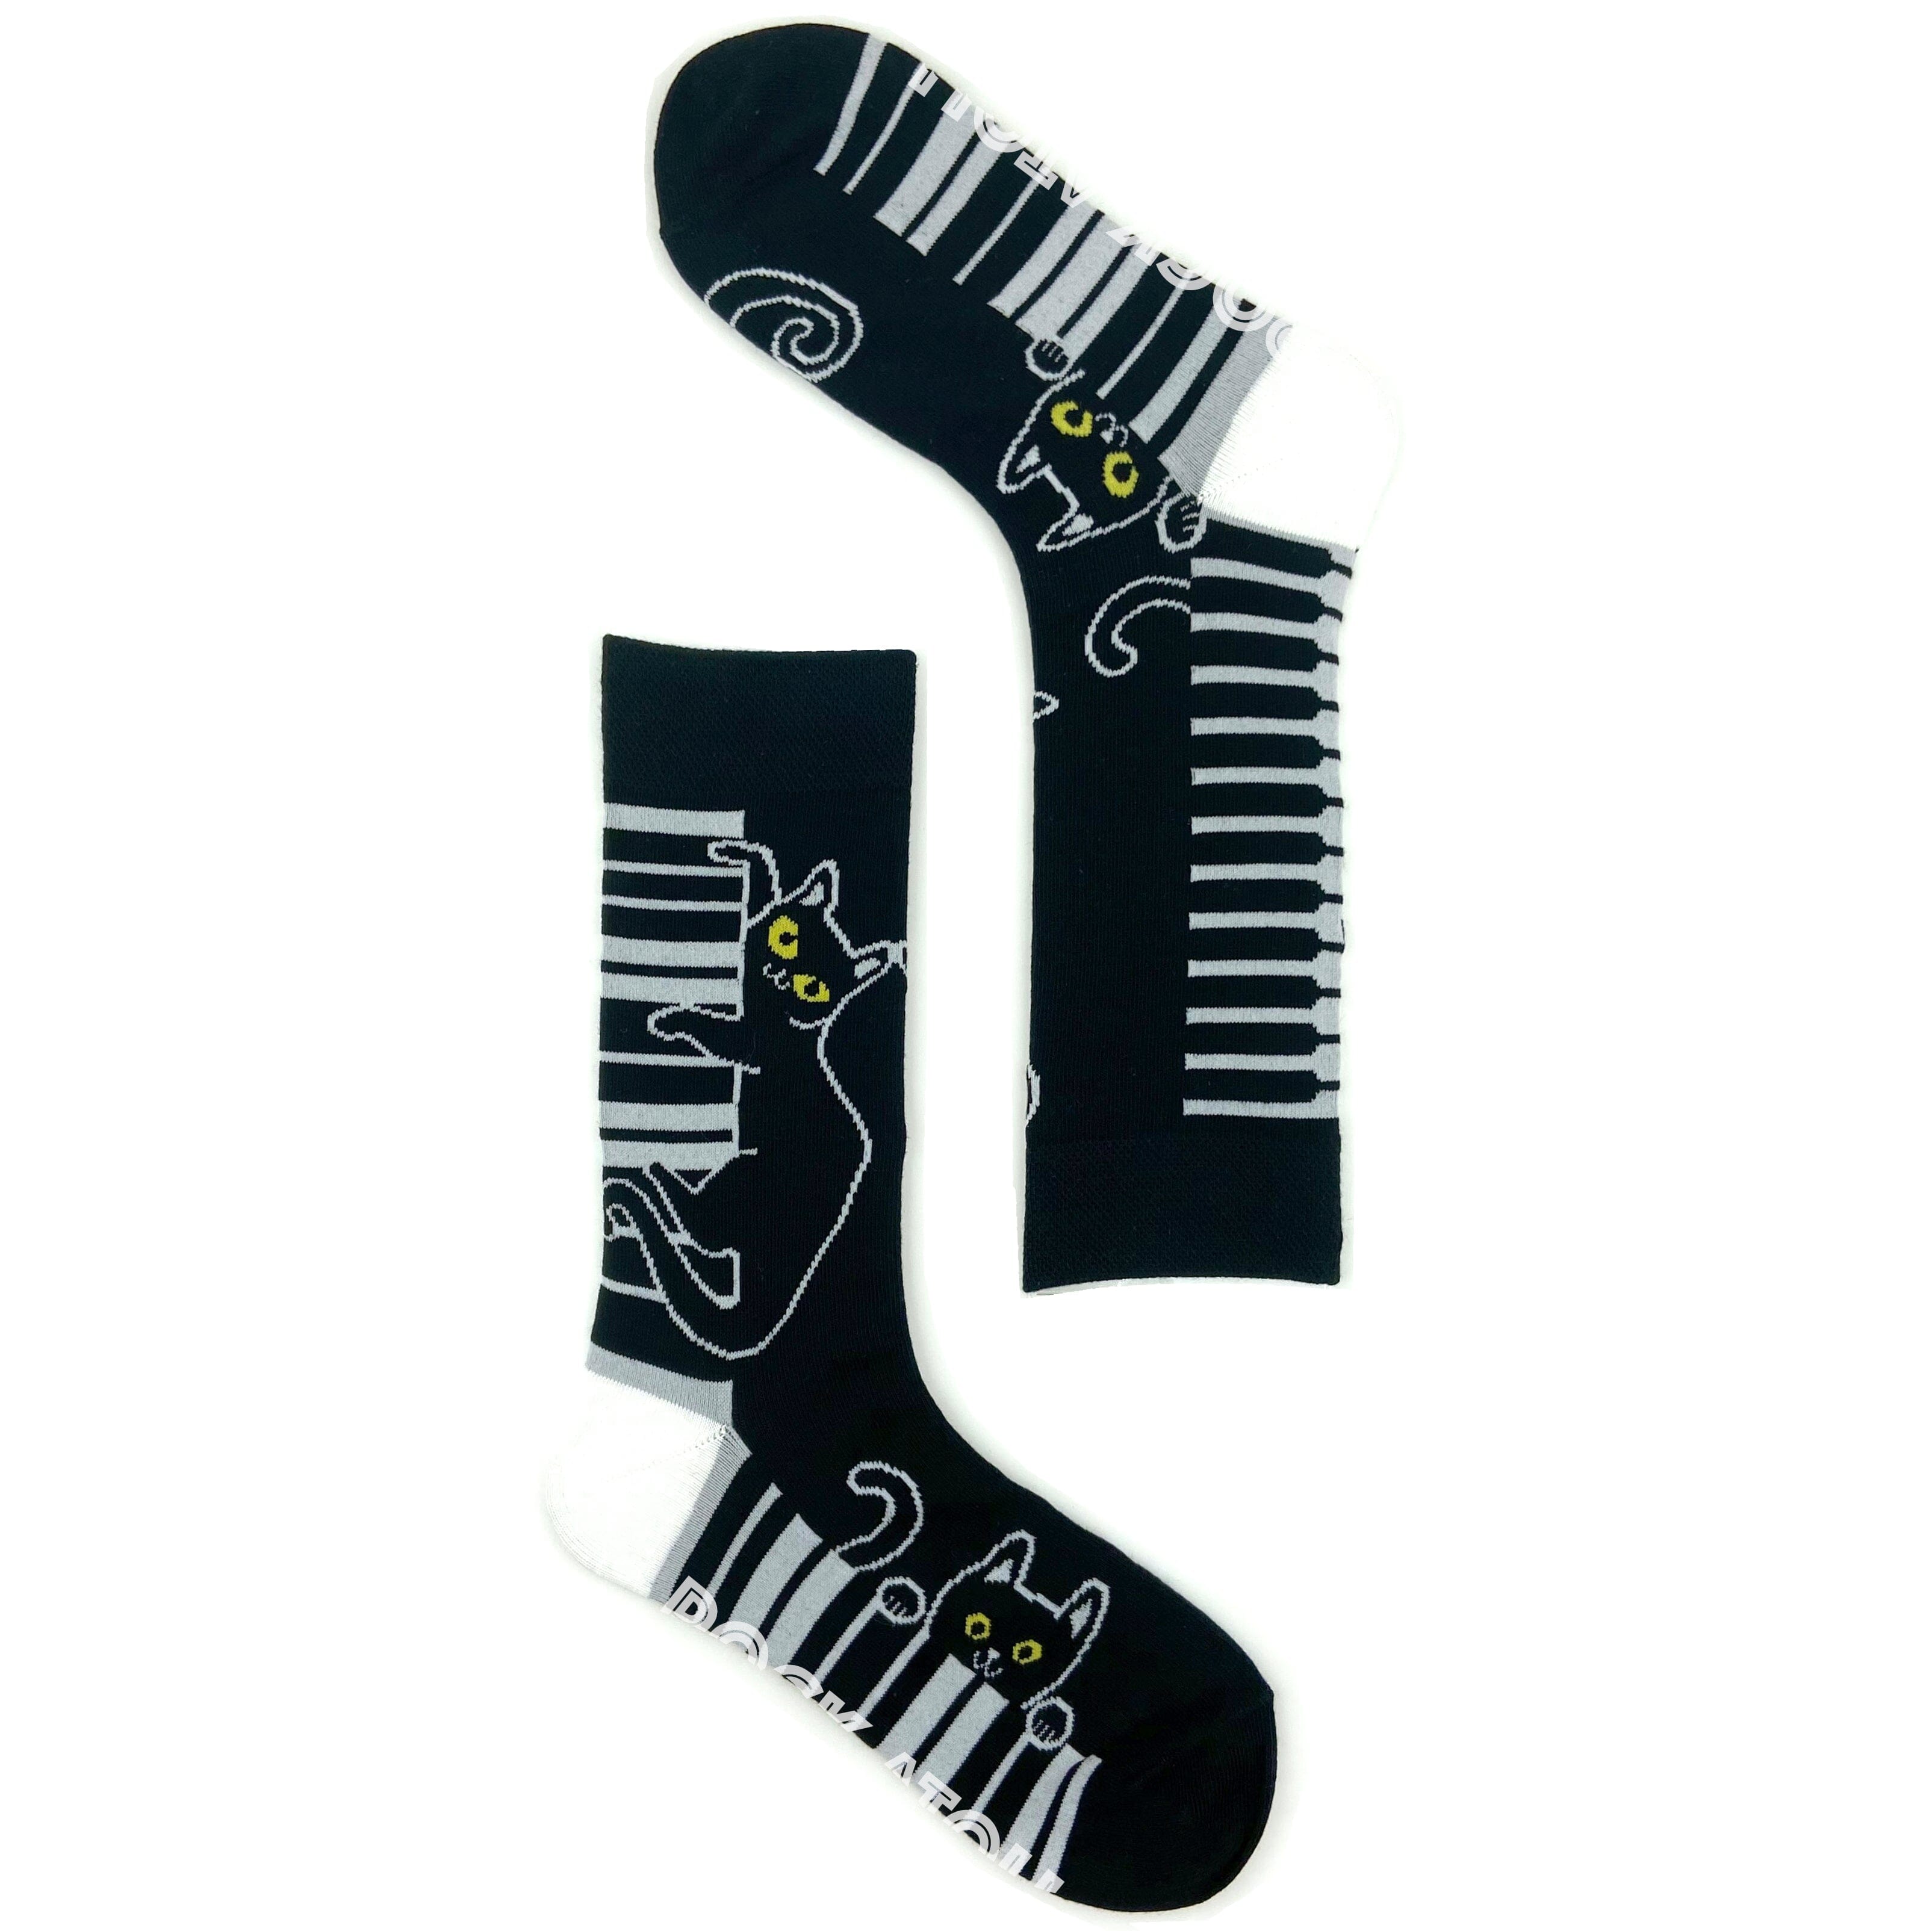 Musical Black Kitty Cat and Piano Keyboard Patterned Novelty Socks